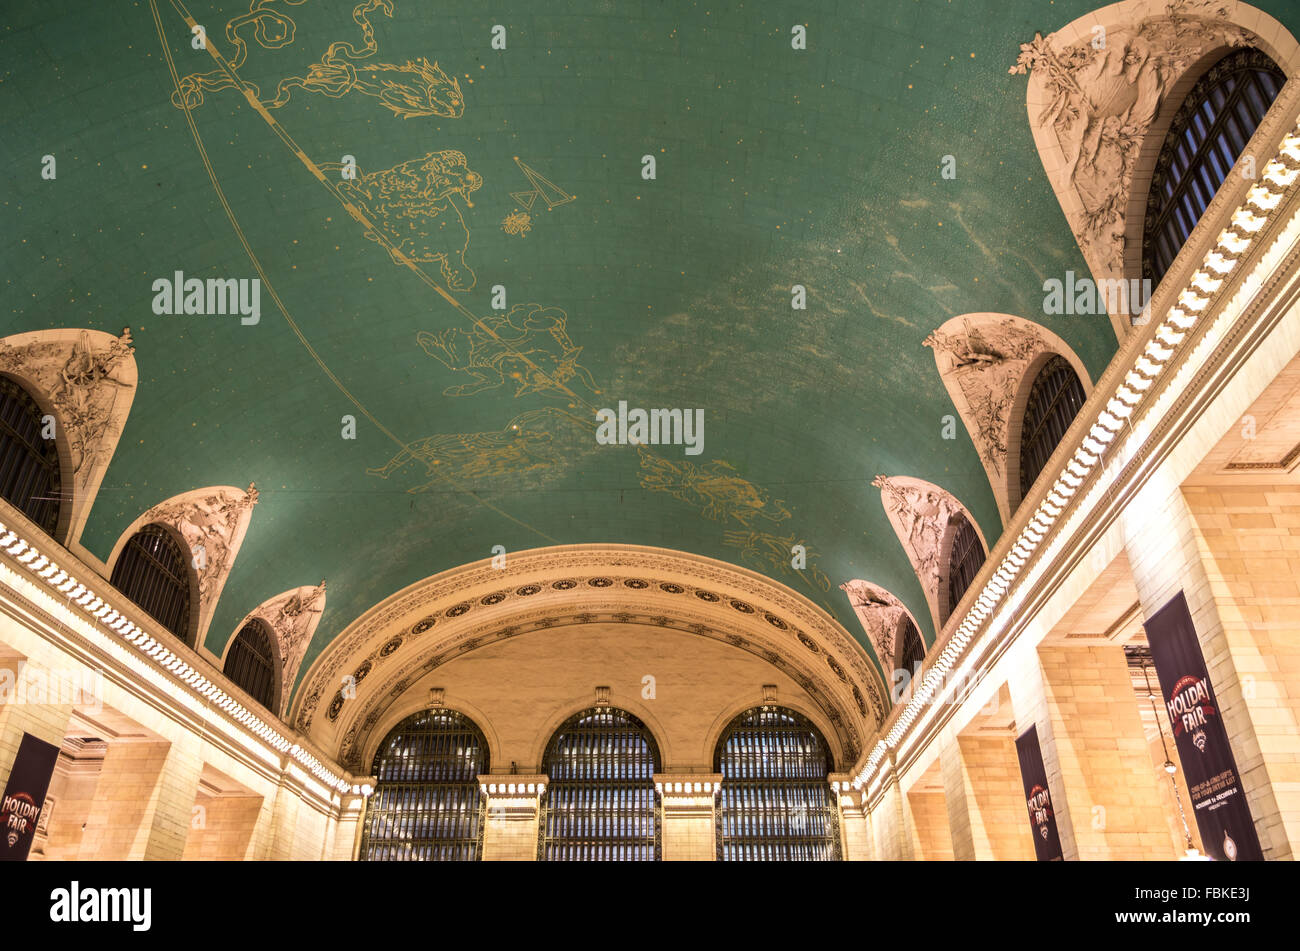 View of the green ceiling of the main concourse of Grand Central Terminal with an astronomical themed mural in gold. Stock Photo